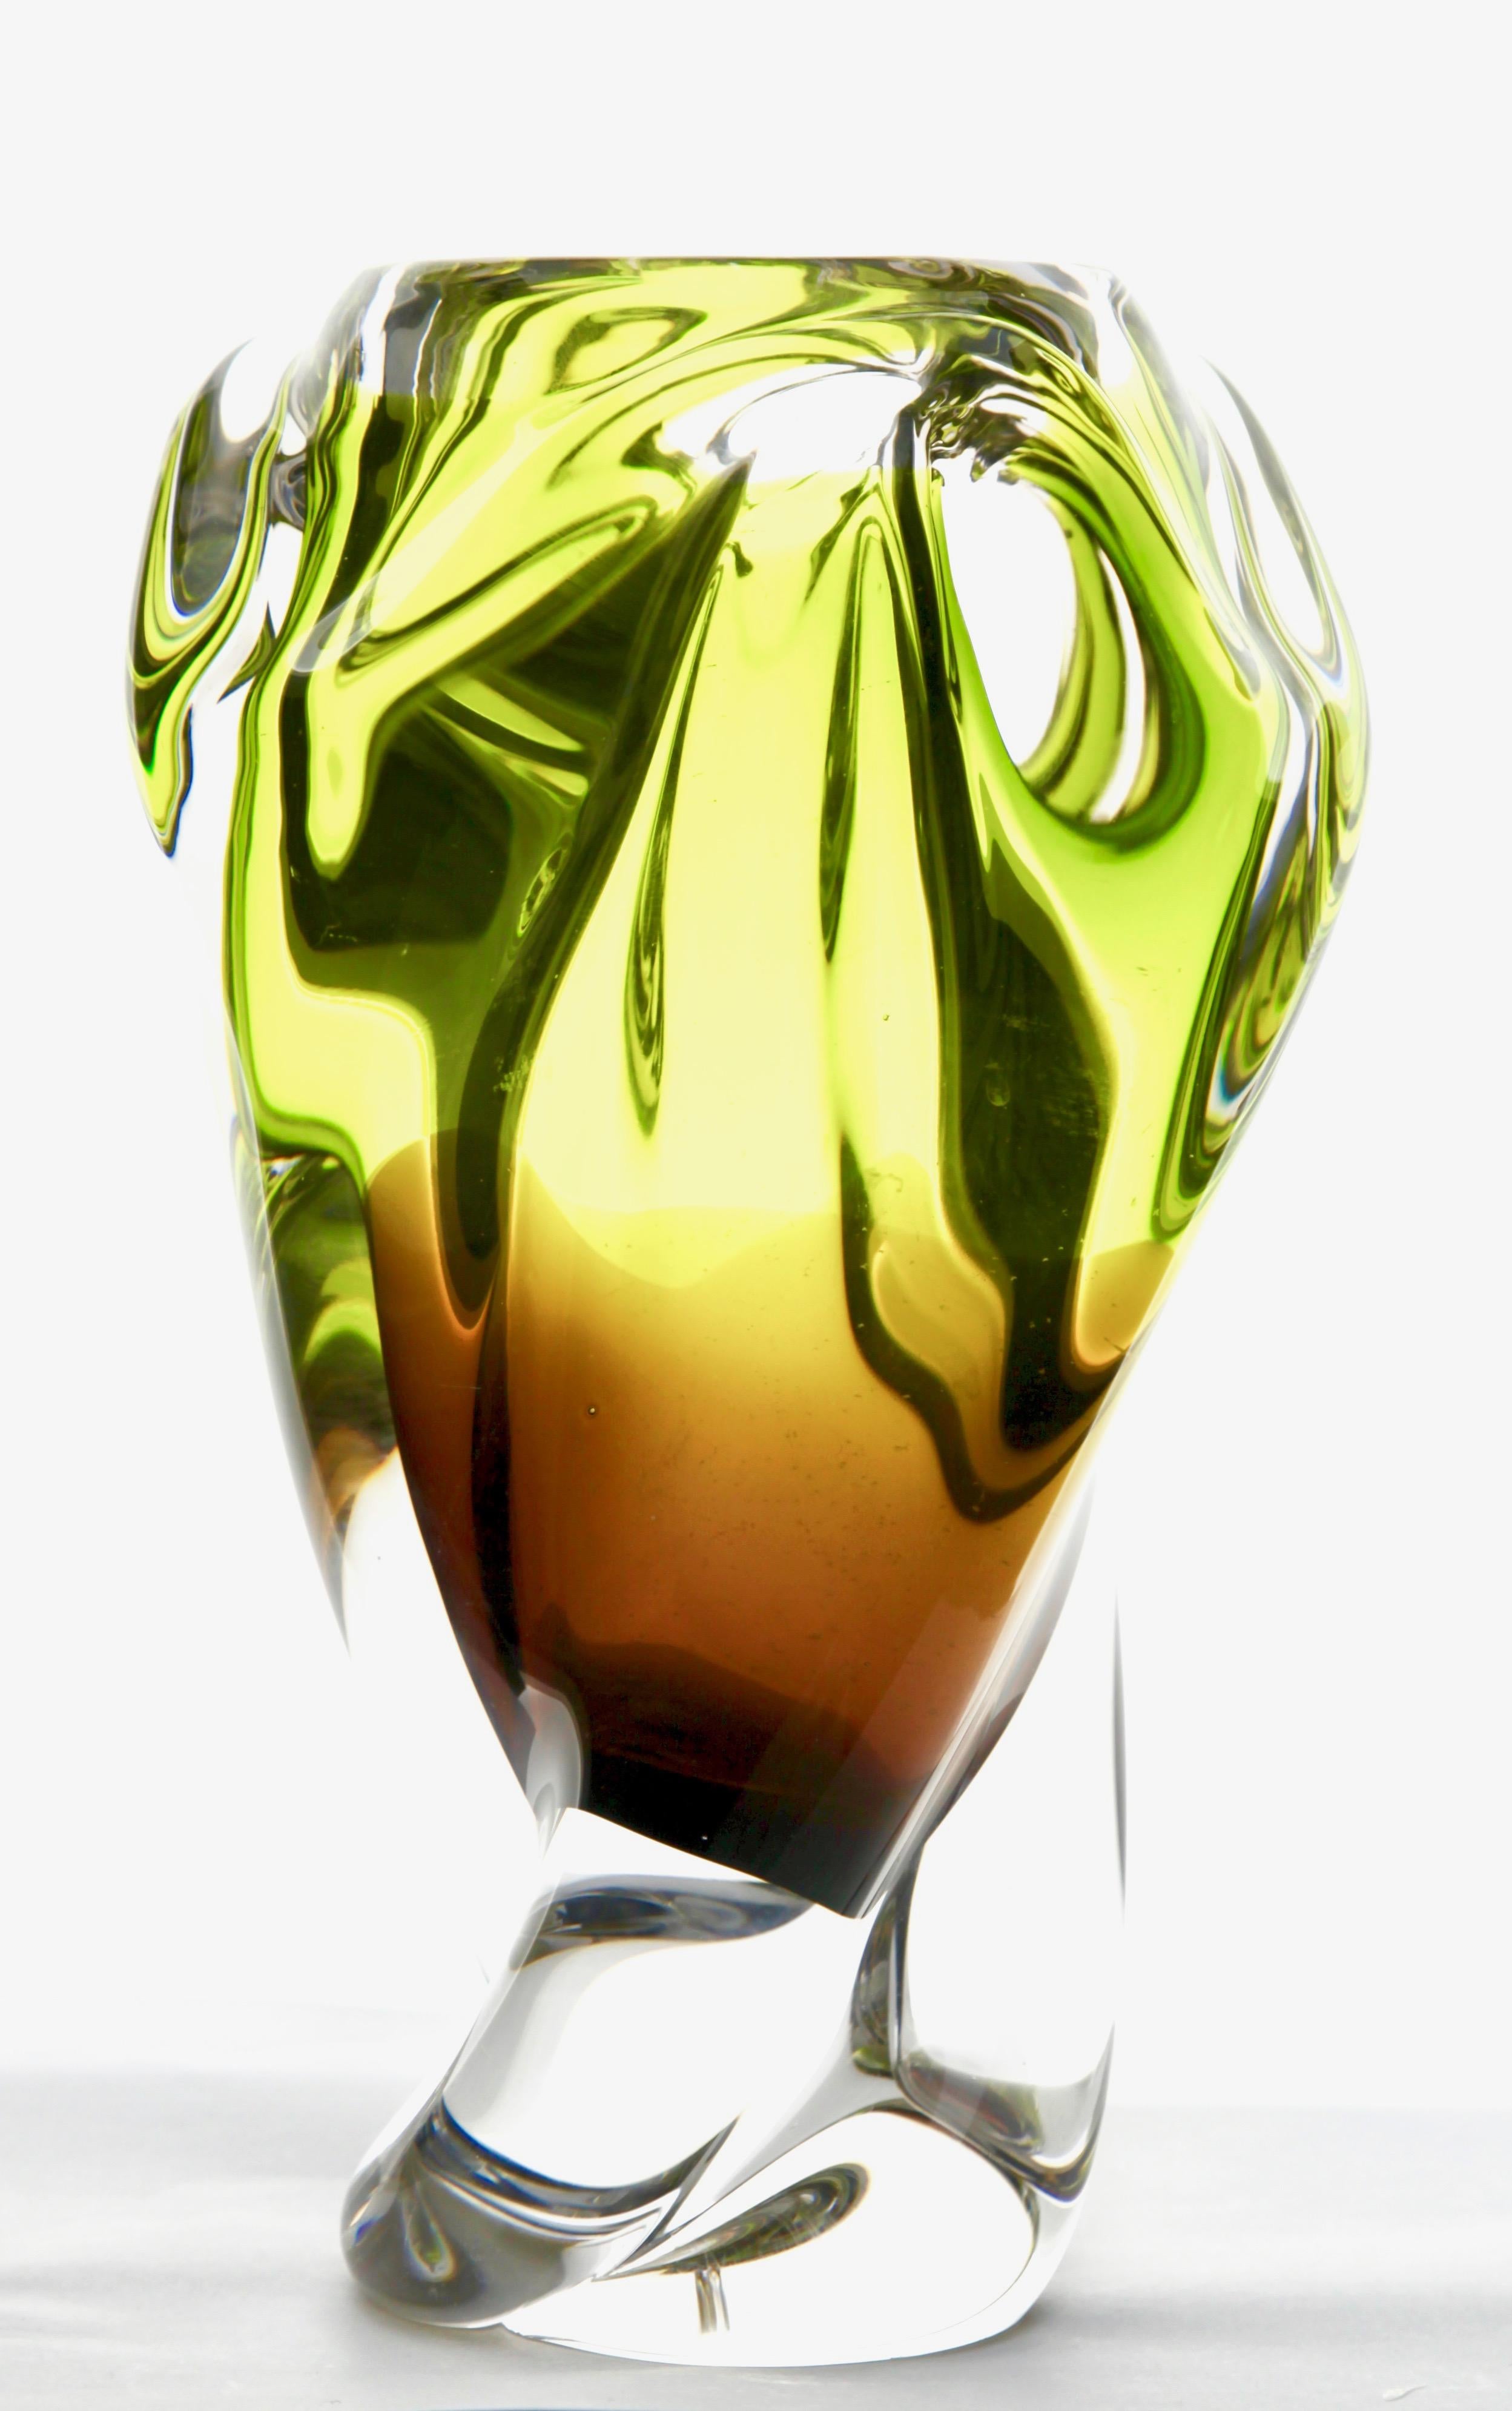 Solid crystal biomorphic vase with waves of bright green and sommerso.

This heavy biomorphic crystal glass vase has been made in Bohemia (modern Czechia) inspired by the designs of Jaroslav Baranek. In the mid-1960s they were mainly produced in